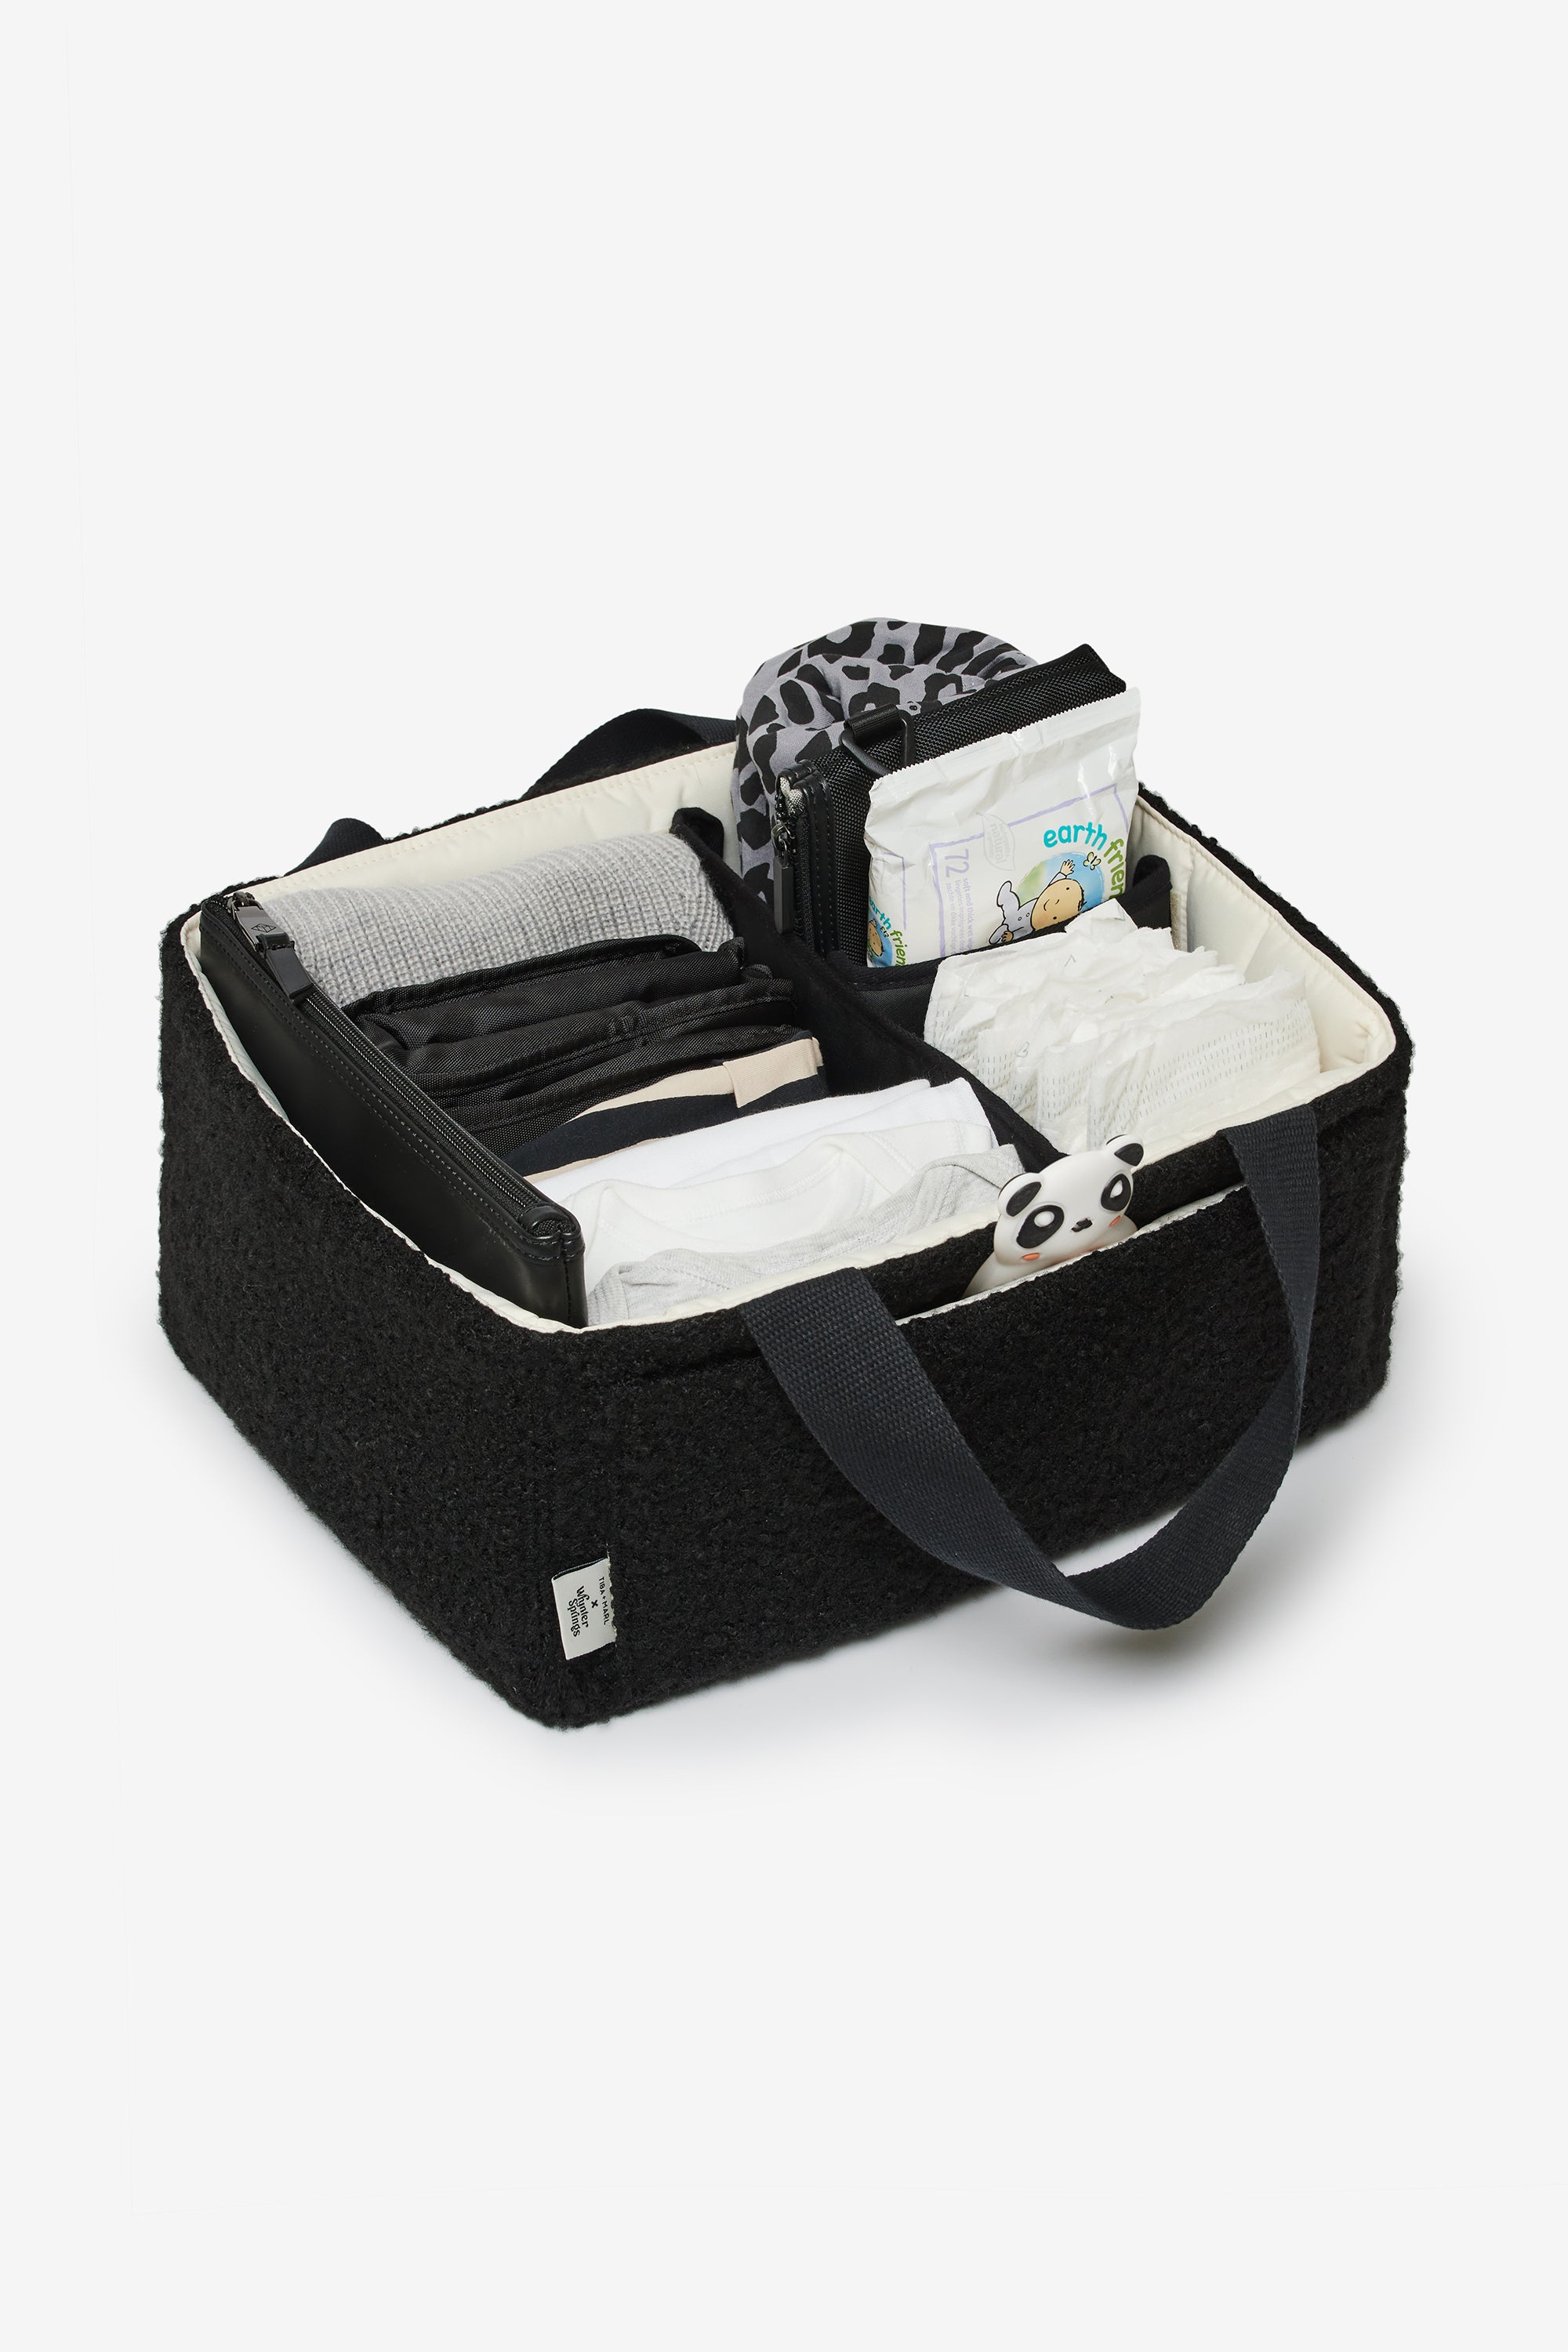 T+M x Whynter Springs Nappy Caddy Organiser Black Boucle